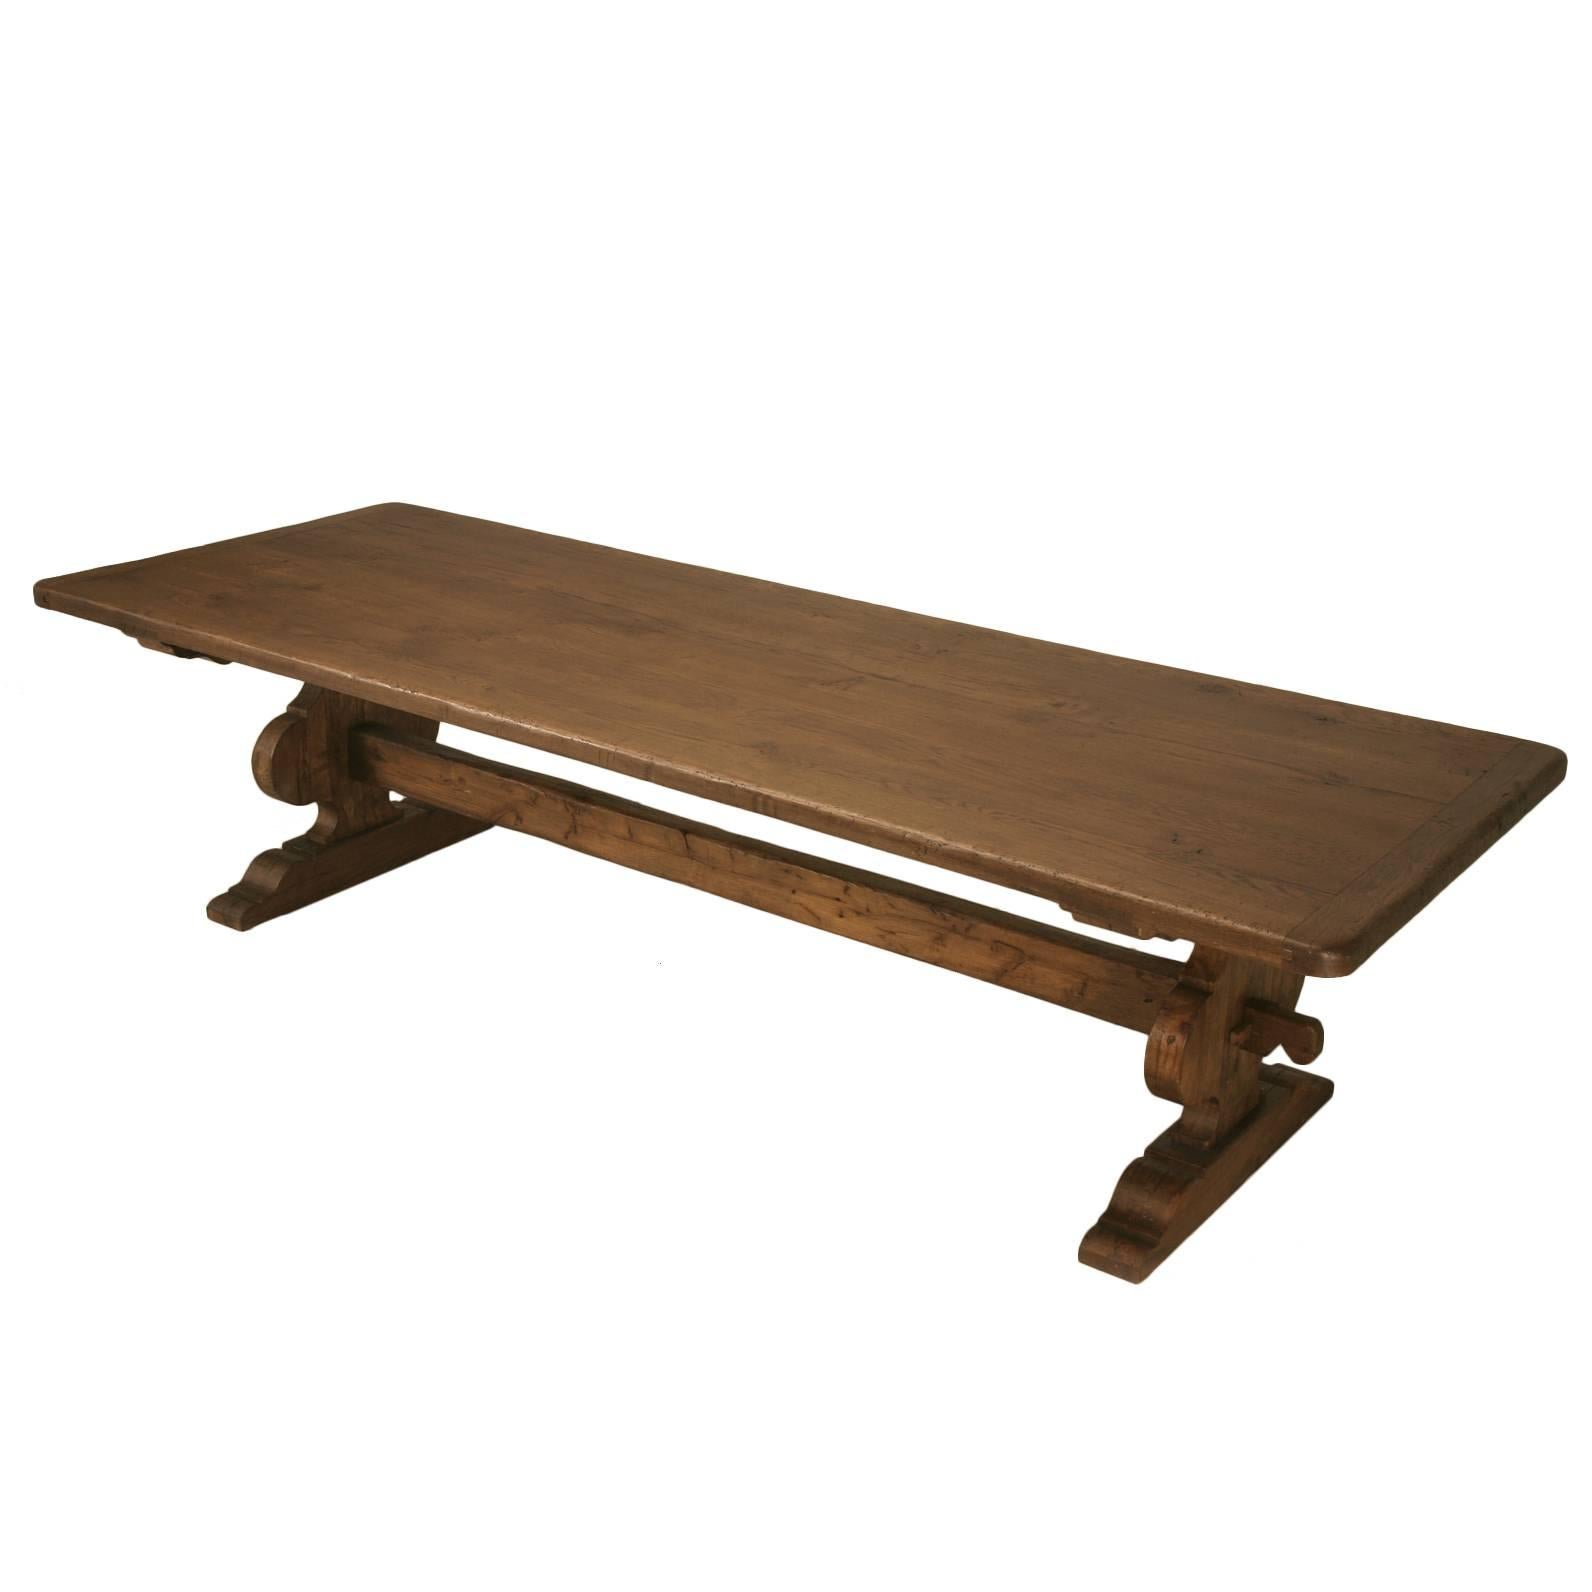 Italian Dining Table in Reclaimed Oak Hand-Crafted by Old Plank in Any Dimension